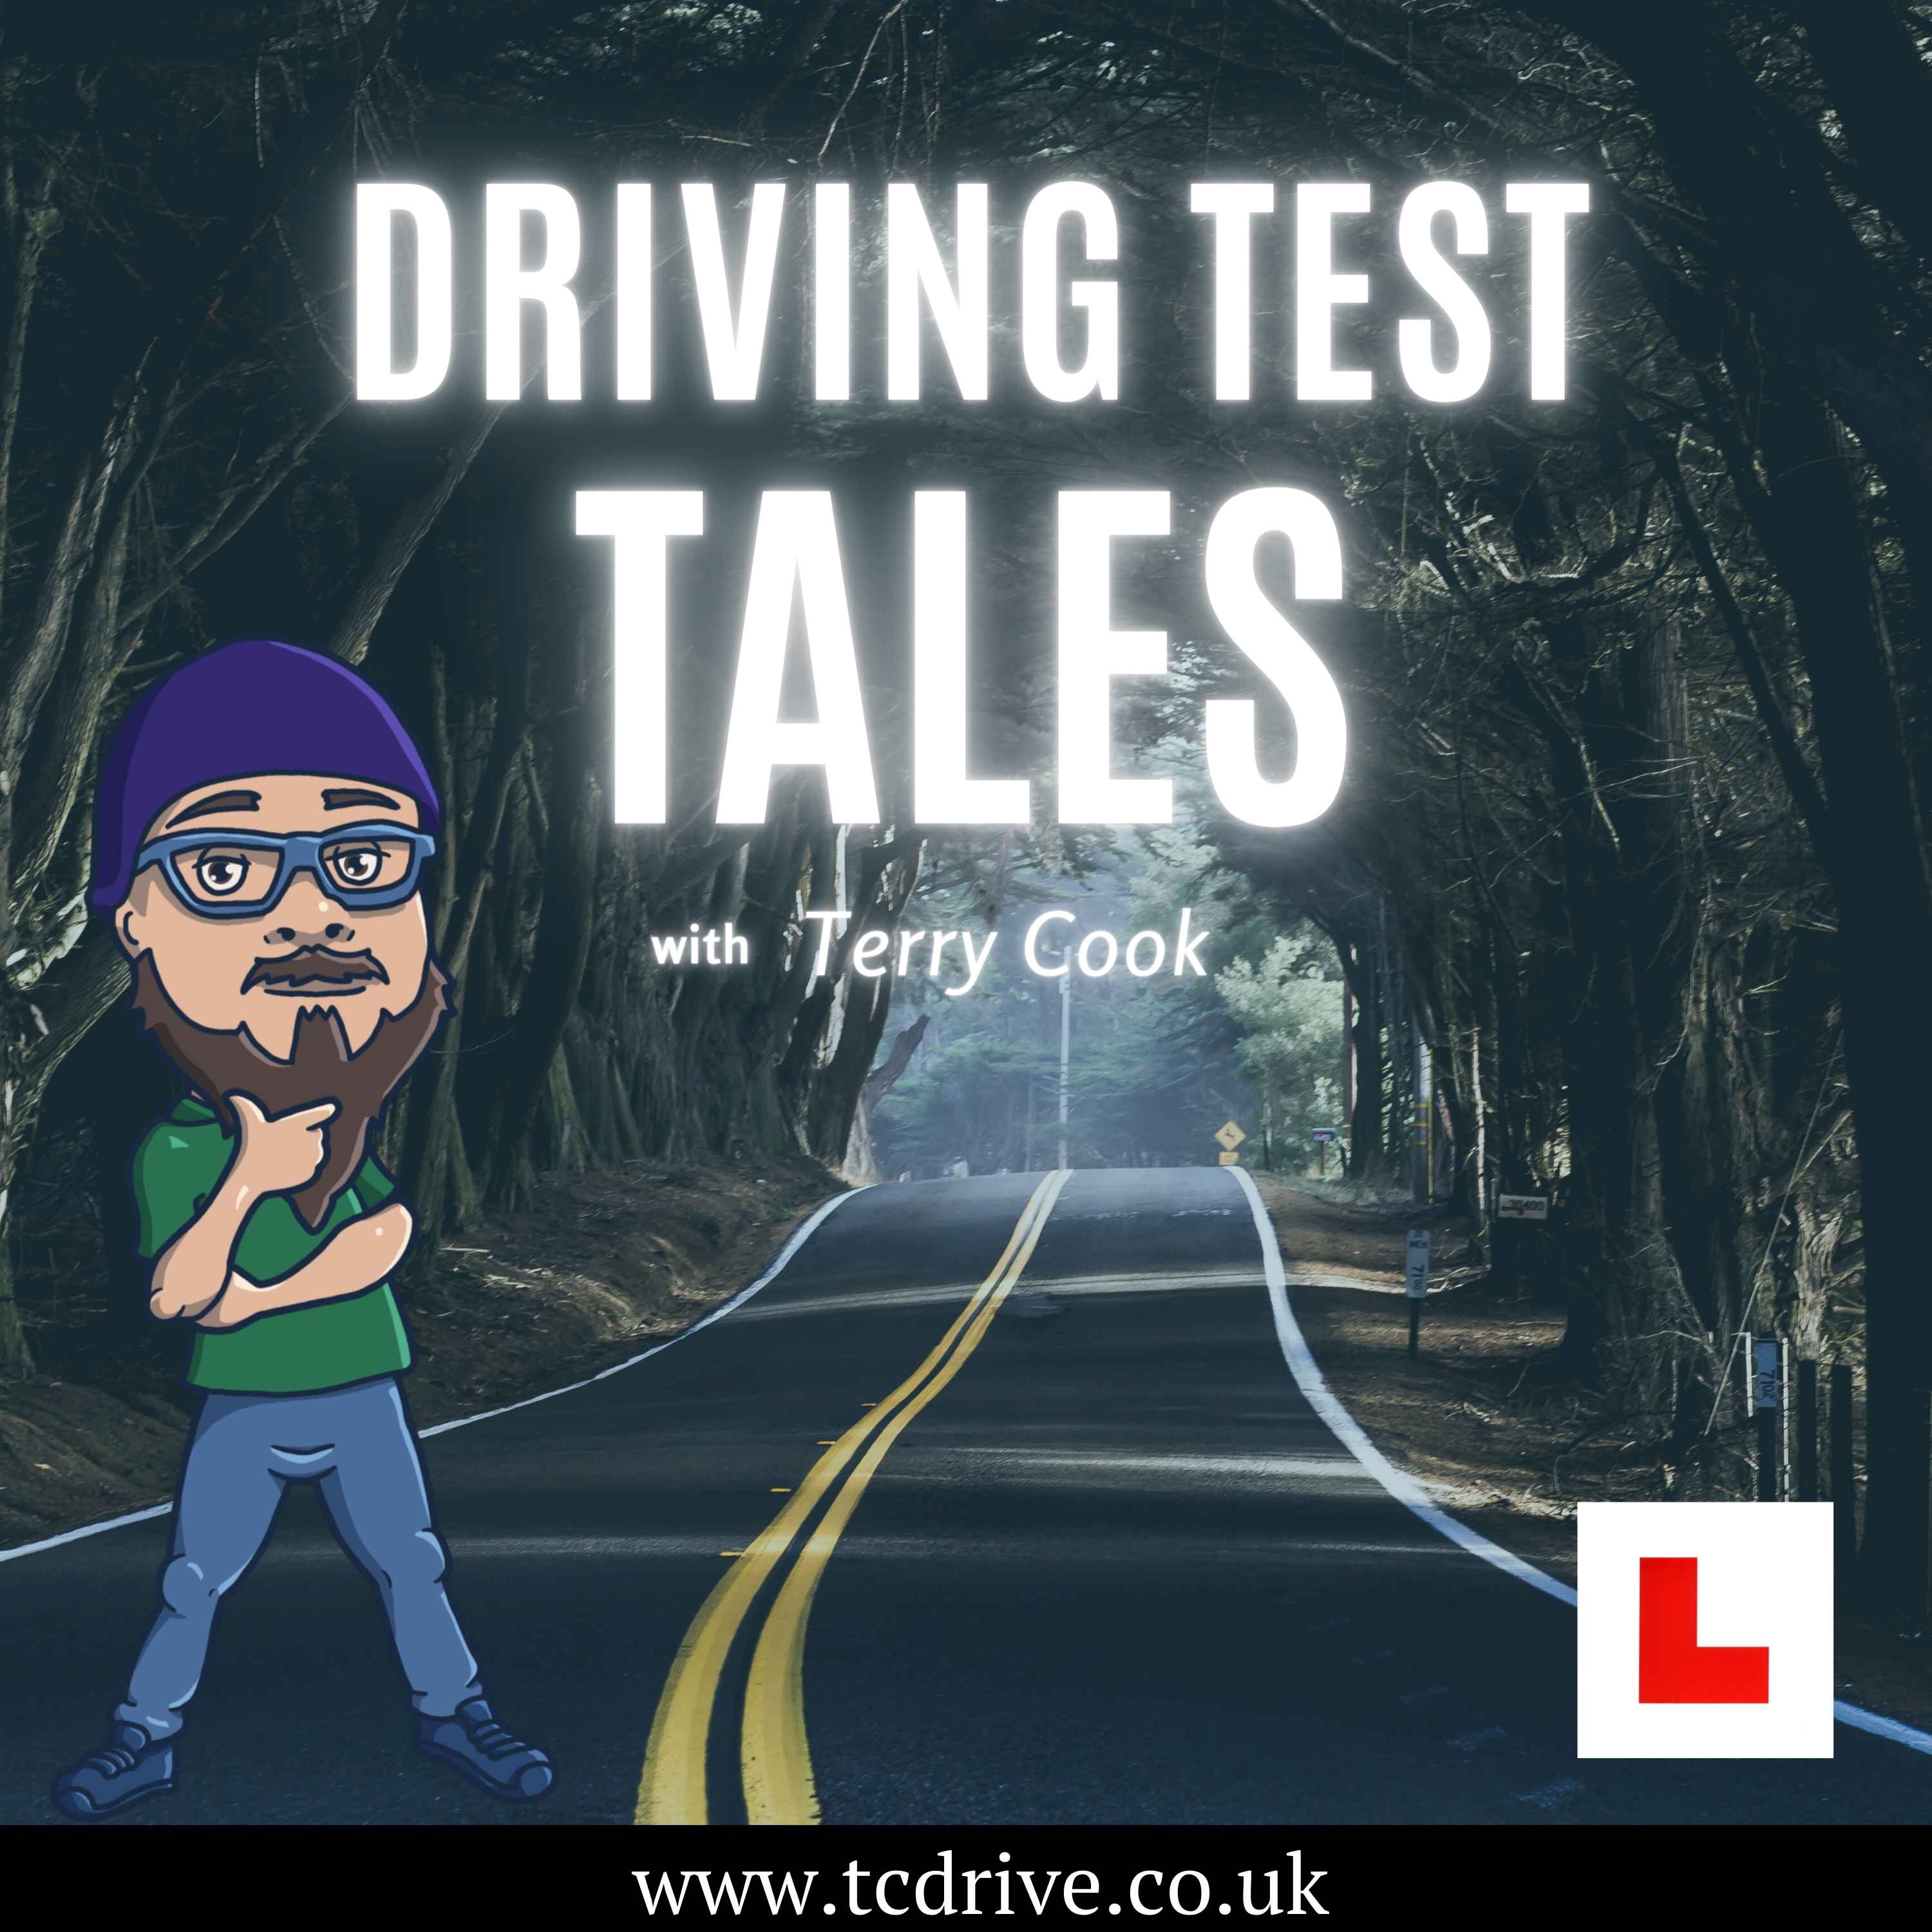 Artwork for podcast Driving Test Tales